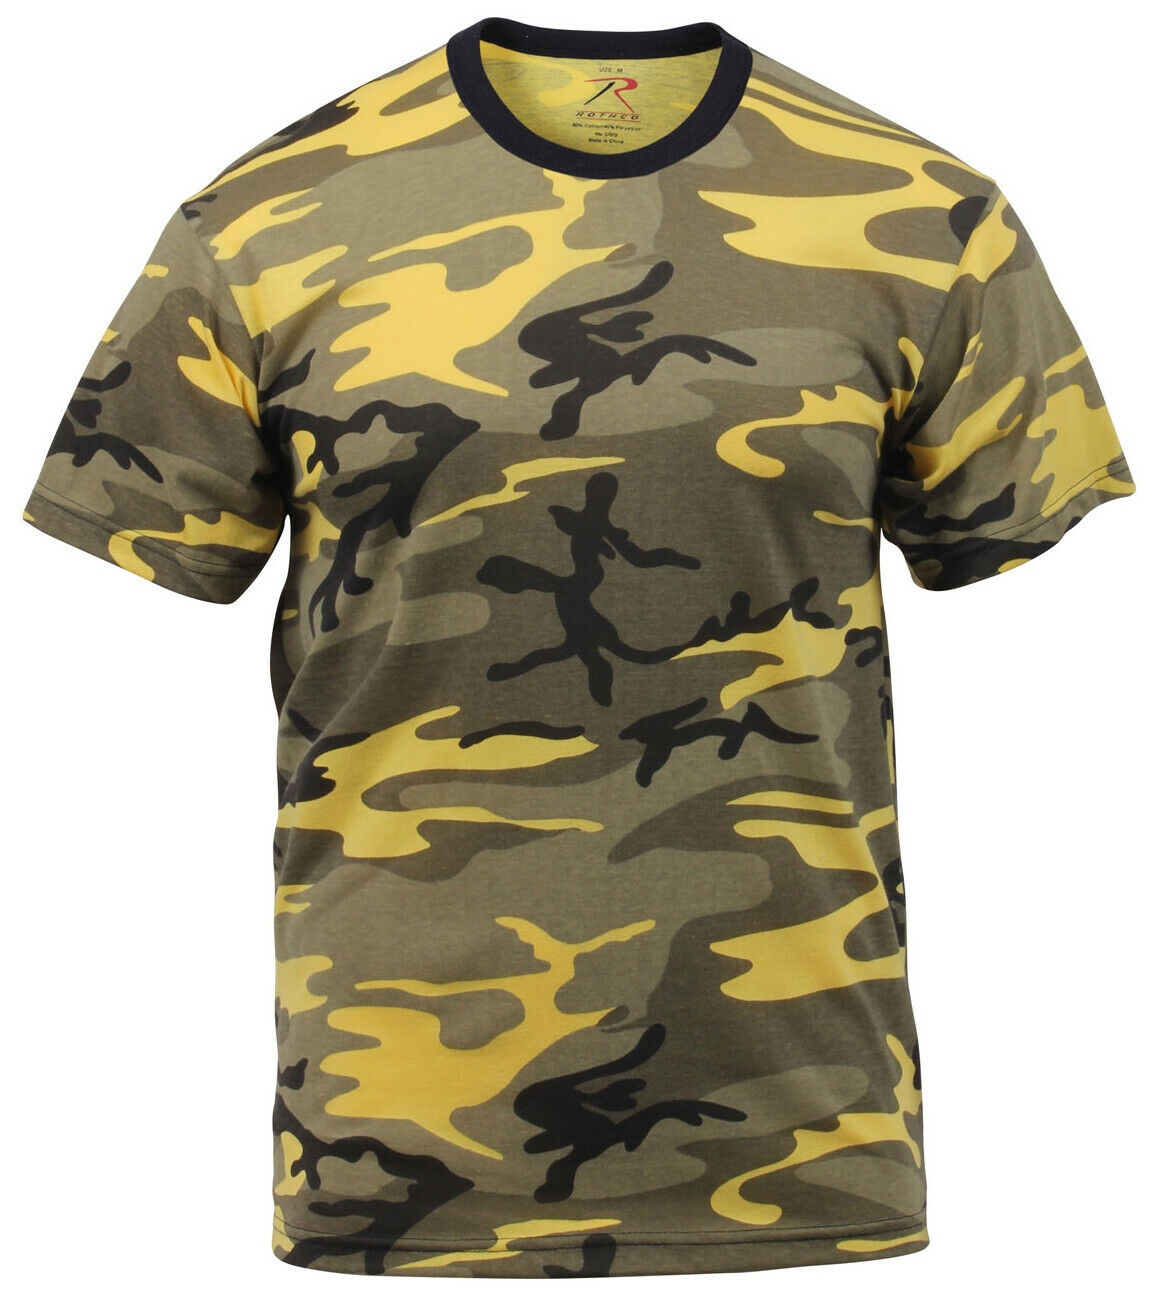 t-shirt camo yellow stinger camouflage cotton poly blend rothco 5994